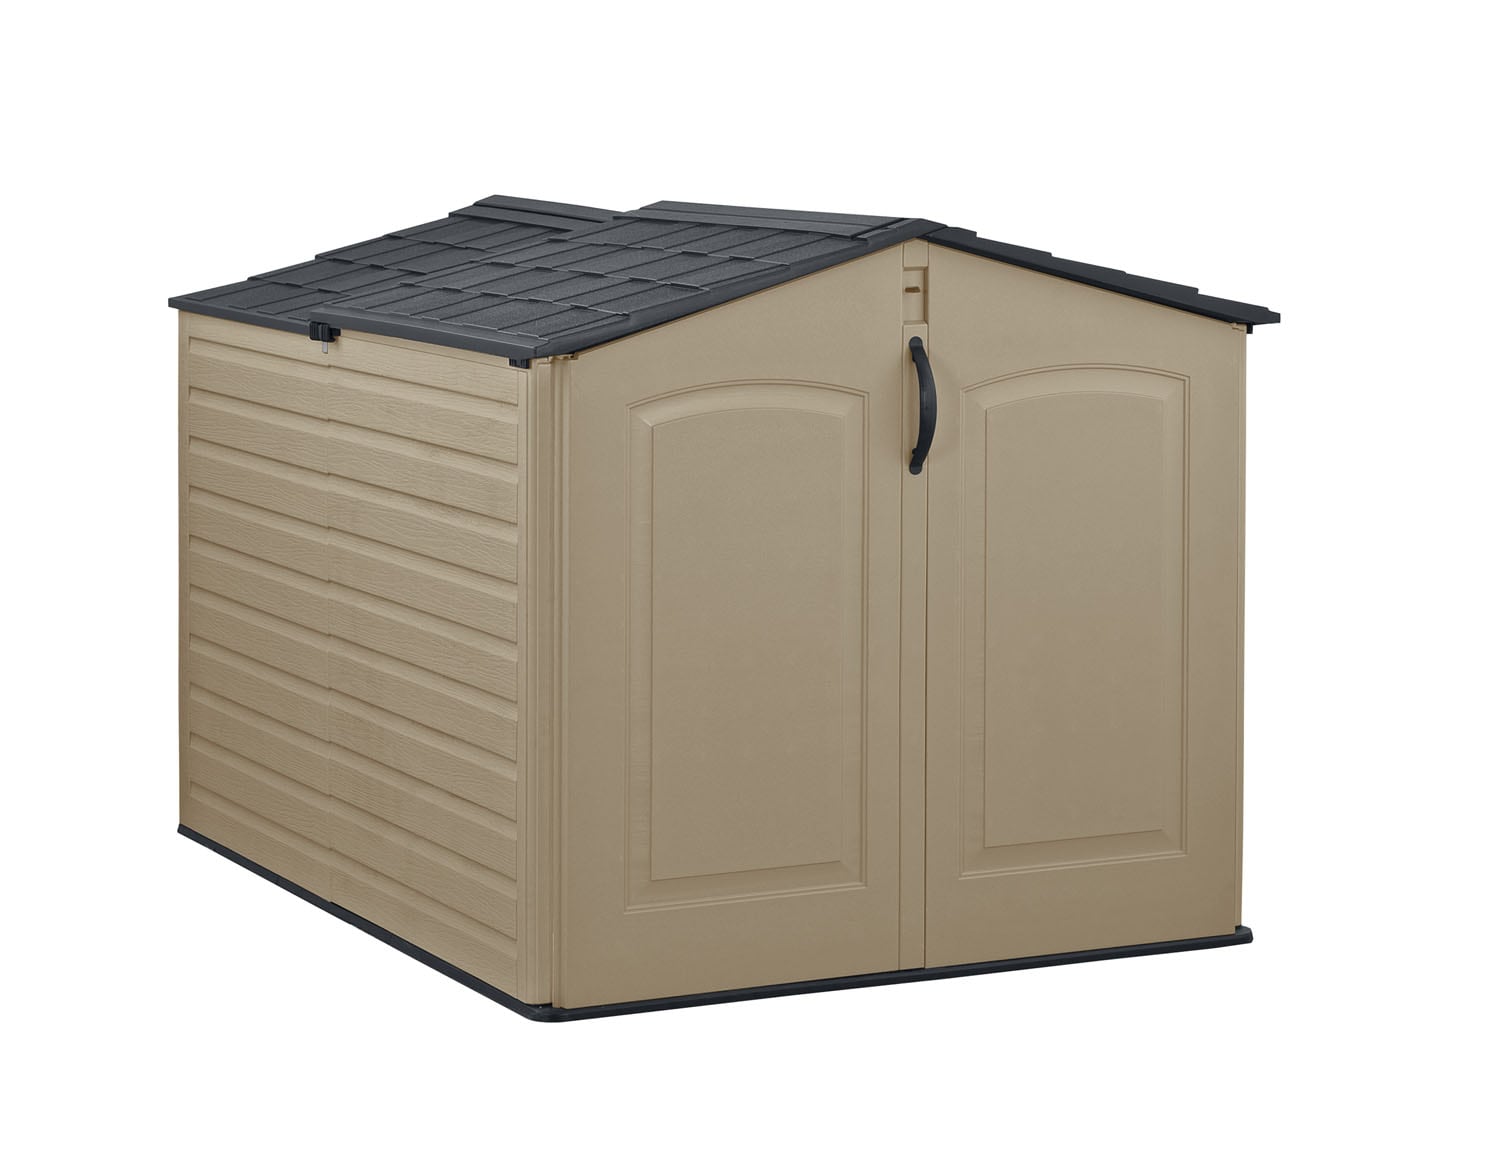 Rubbermaid Outdoor.storage shed with Shelves - general for sale - by owner  - craigslist